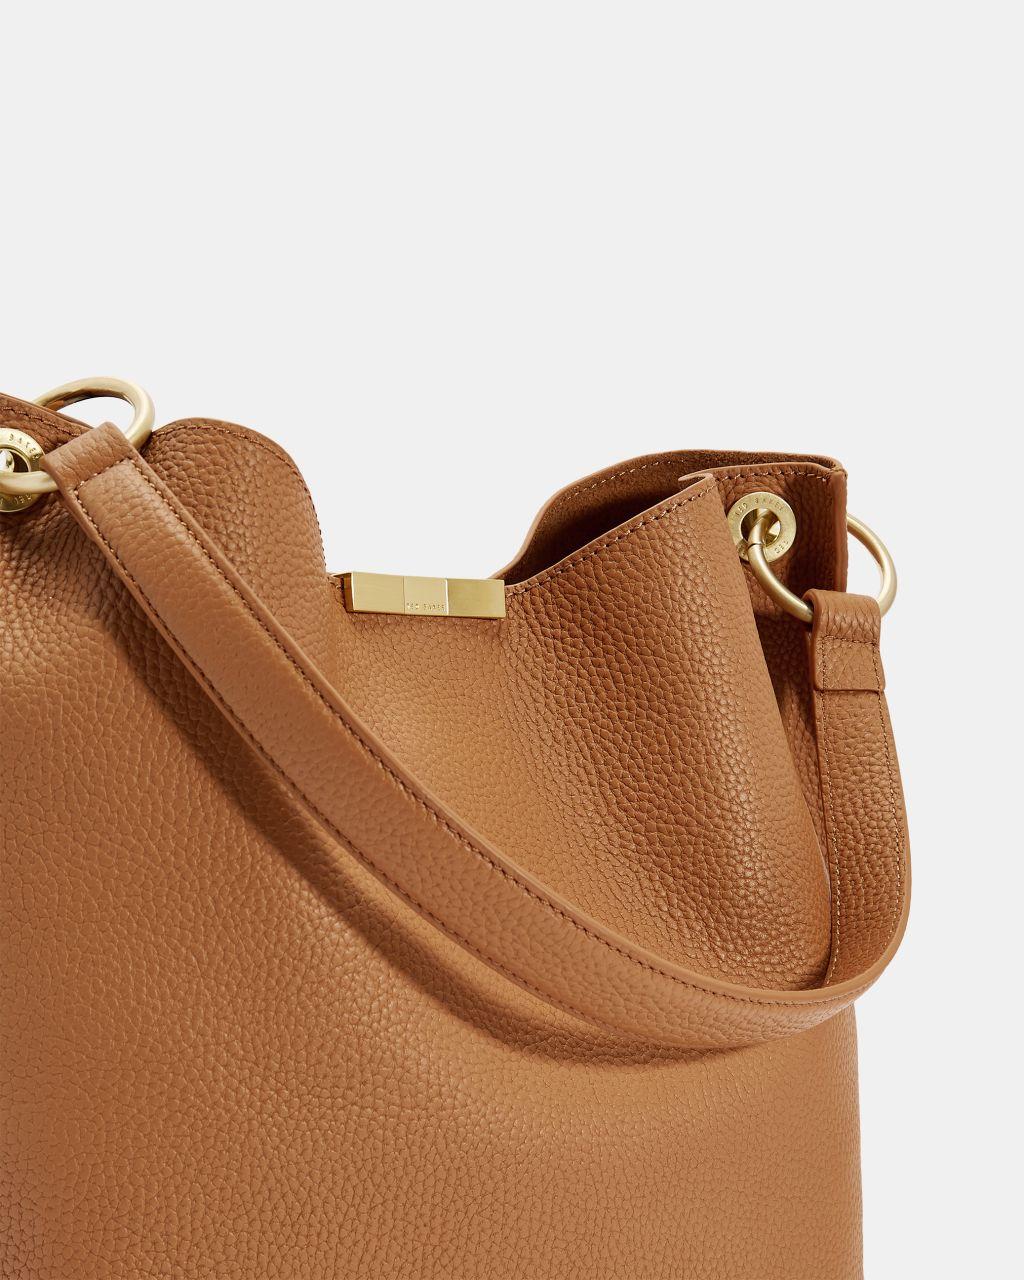 Ted Baker Candiee Bow Leather Hobo in Tan (Brown) - Lyst